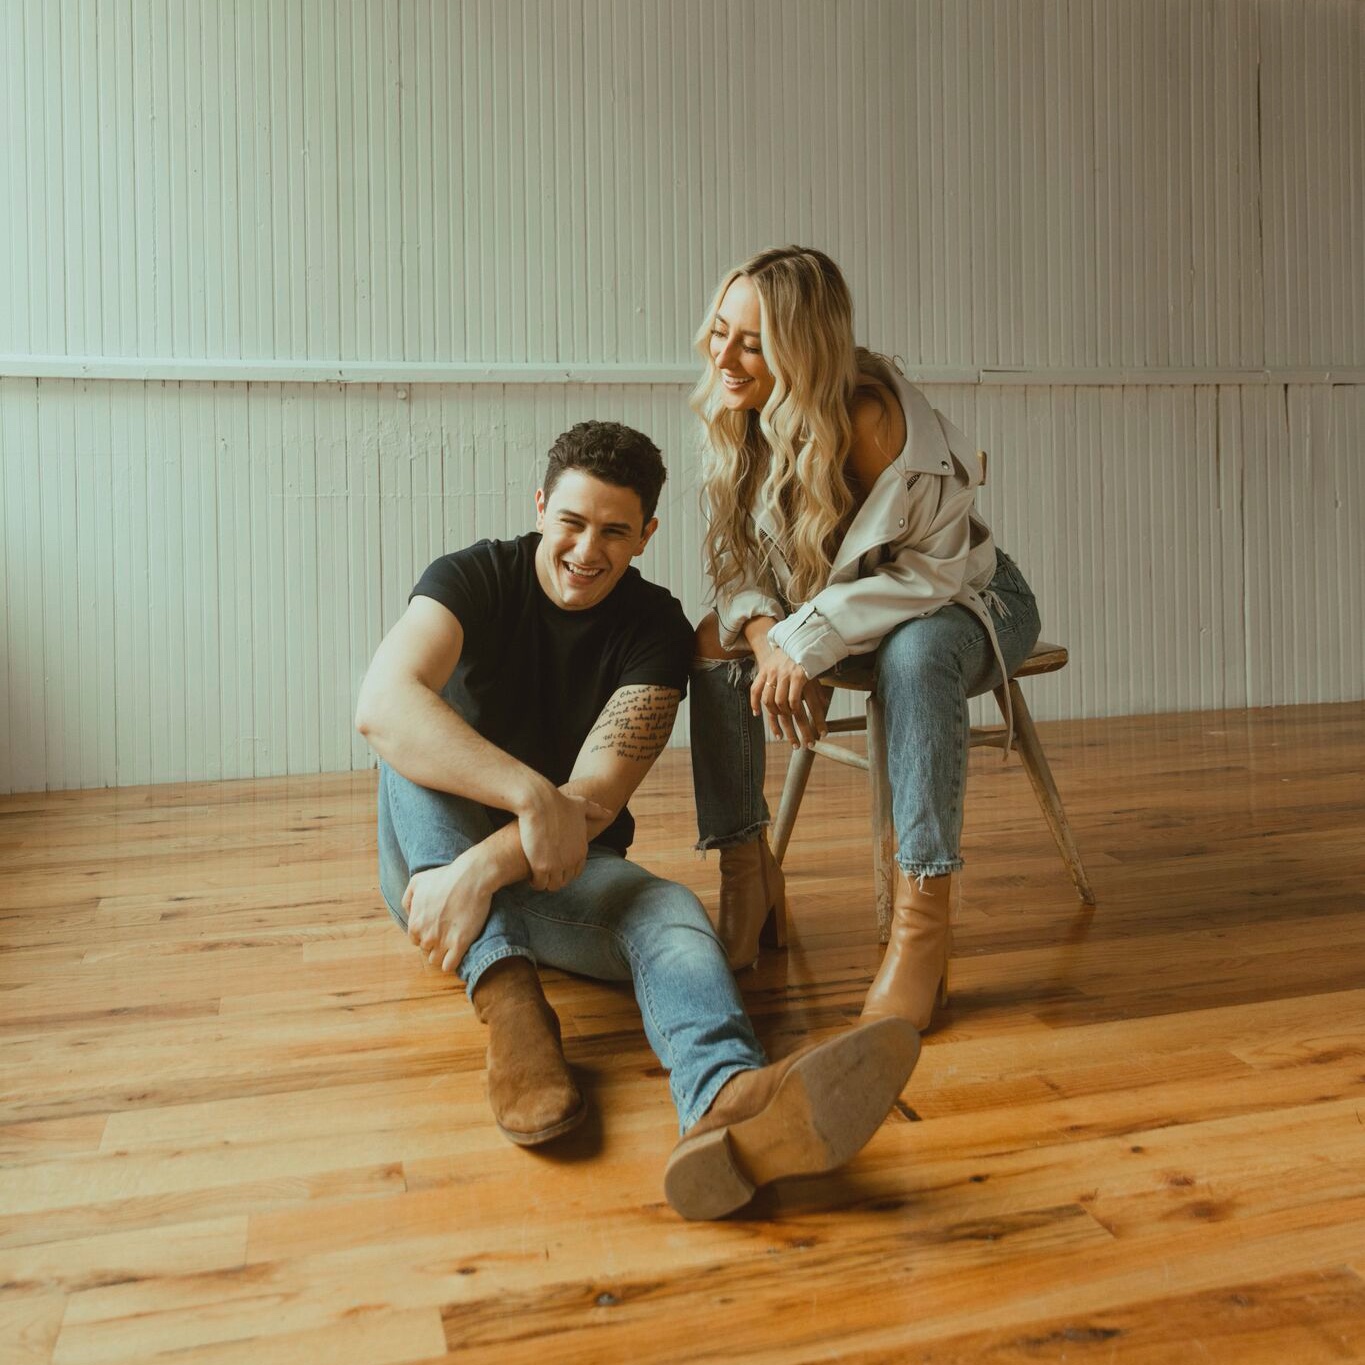 Ashley Cooke Opens Up About Her Duet With Roman Alexander For “Between You & Me” (Exclusive)